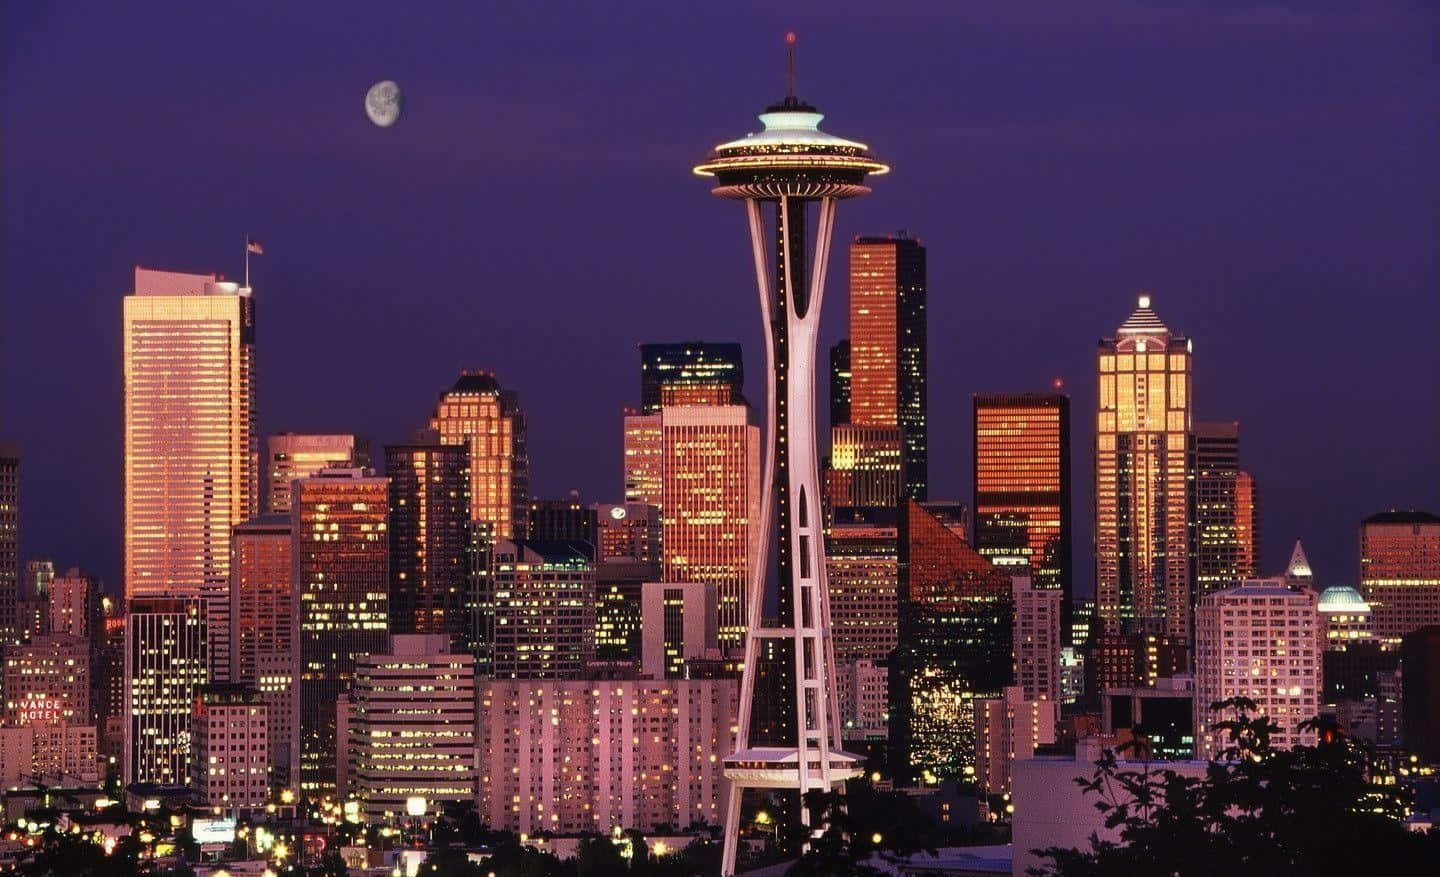 Download Cool Seattle Skyline At Night Wallpaper 